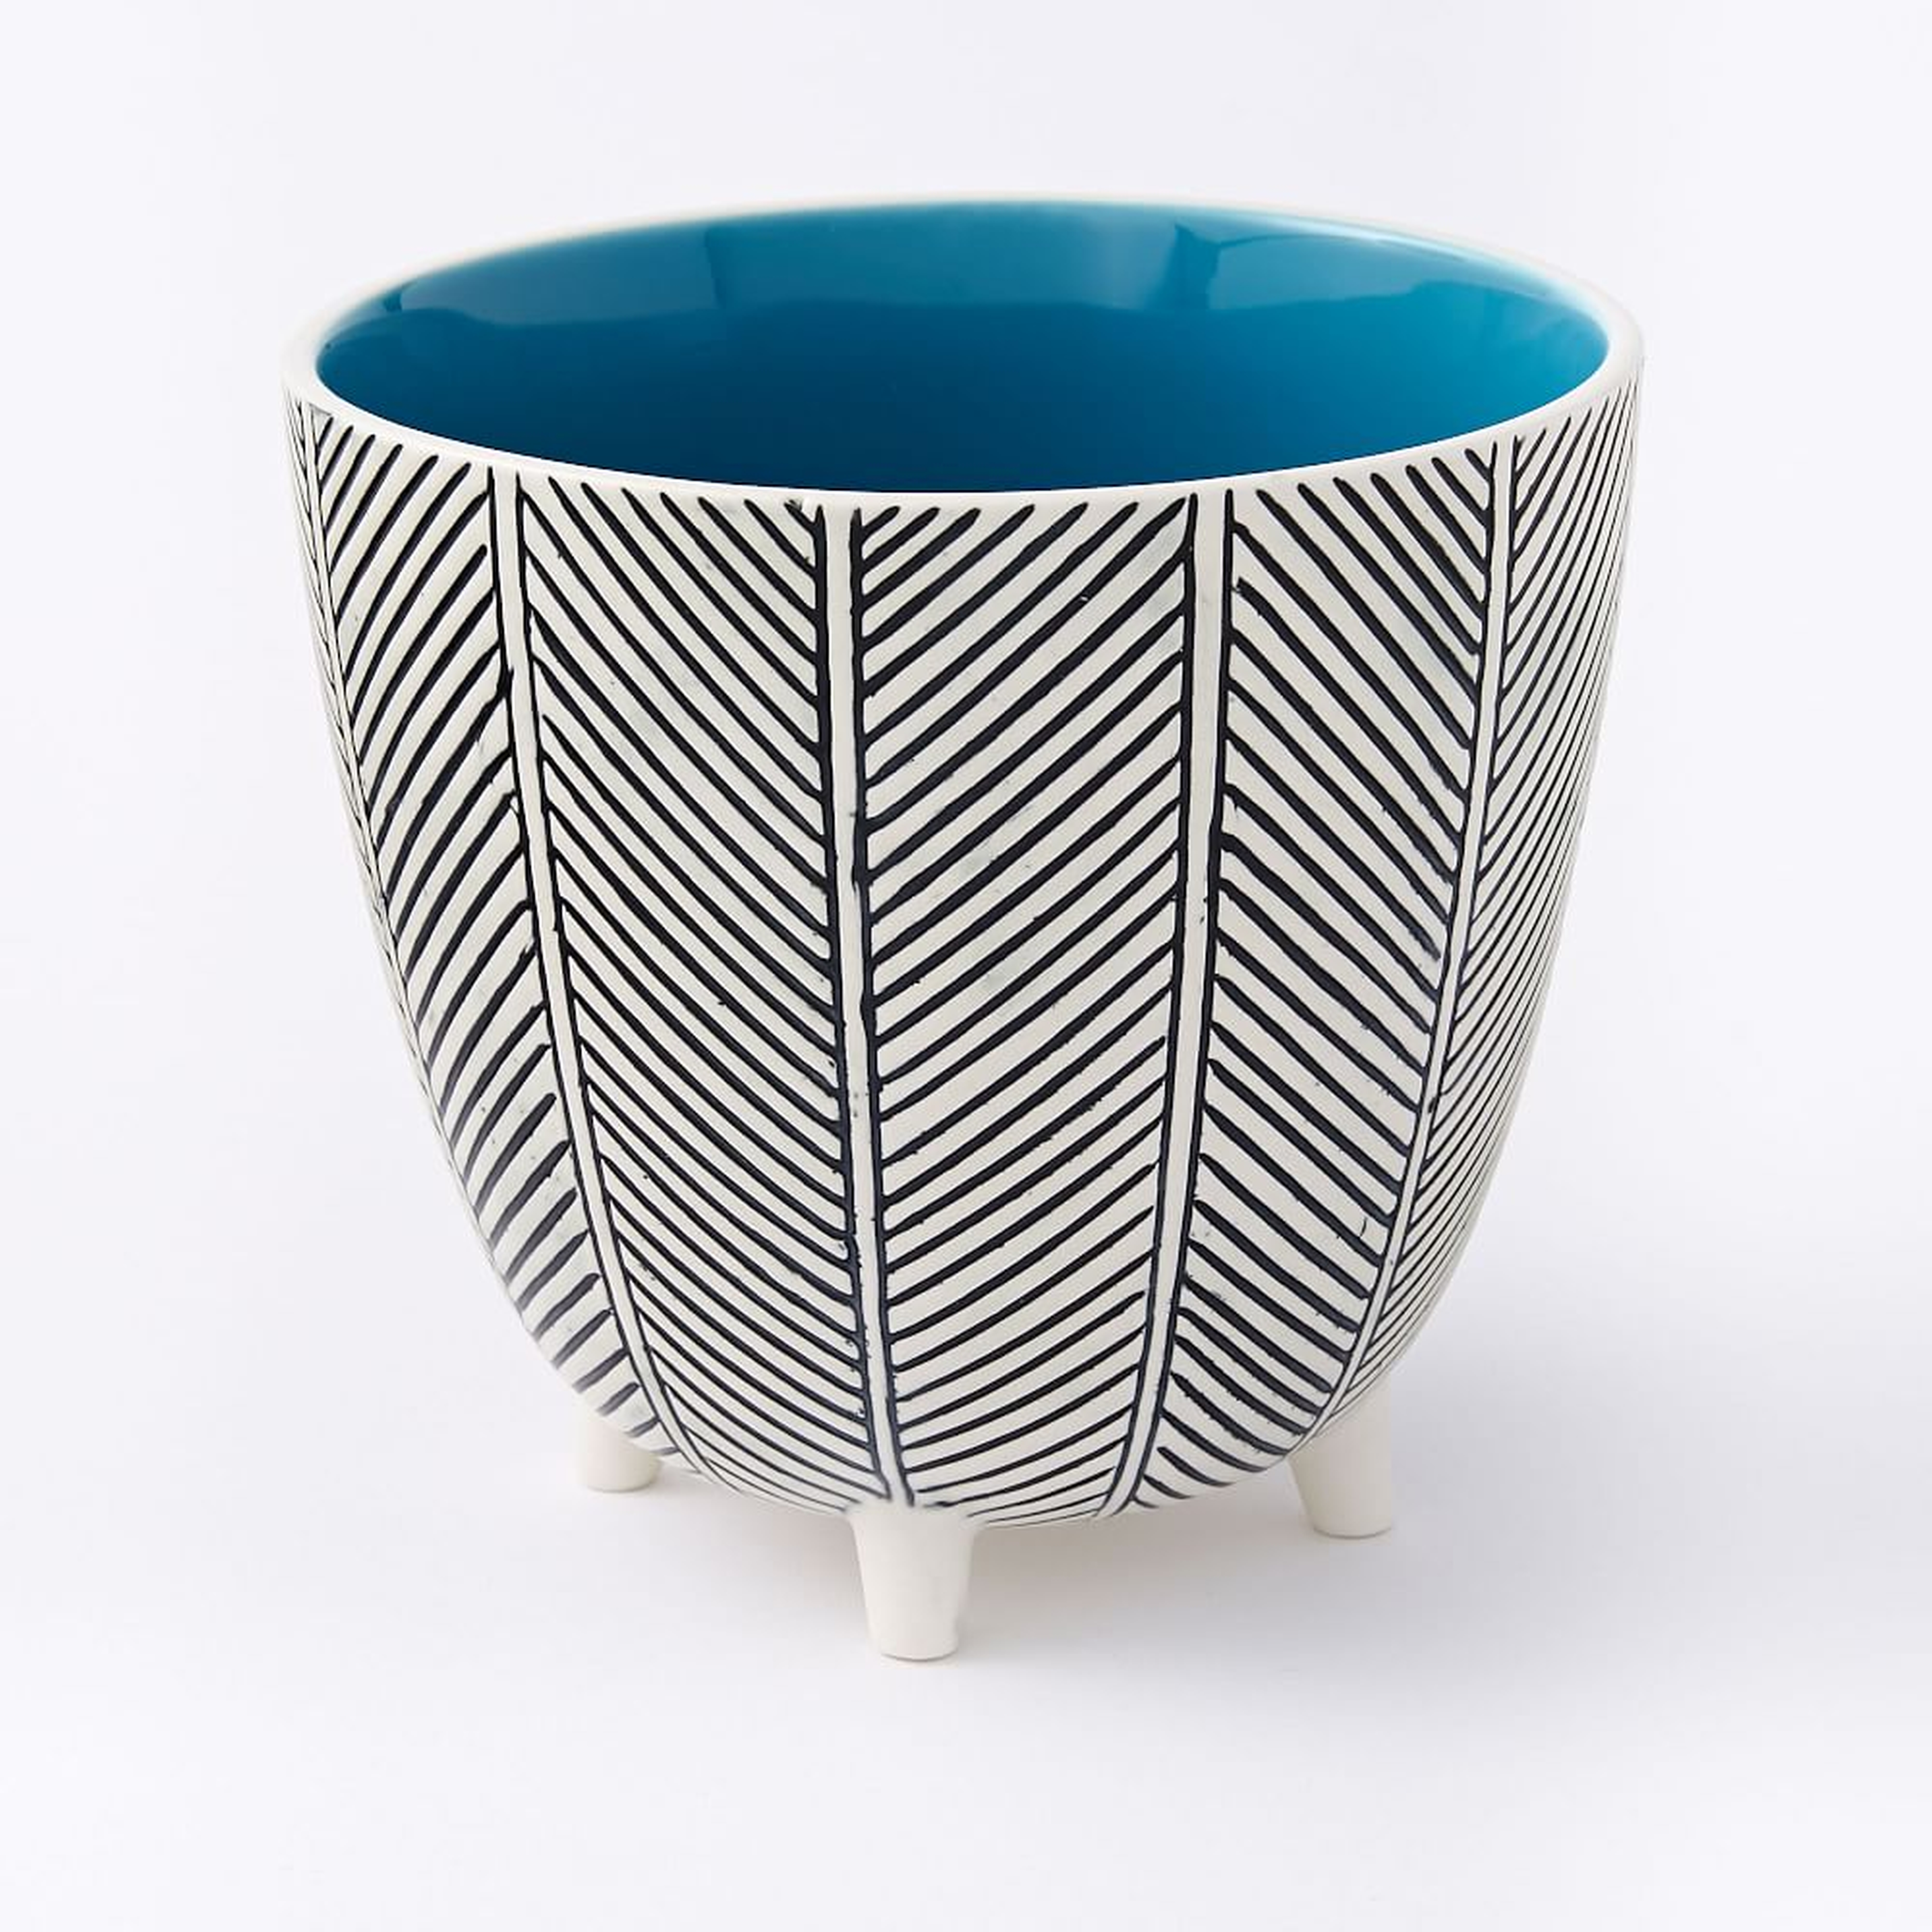 Art in the Forest Cachepot, Herringbone/Teal, 6" - West Elm